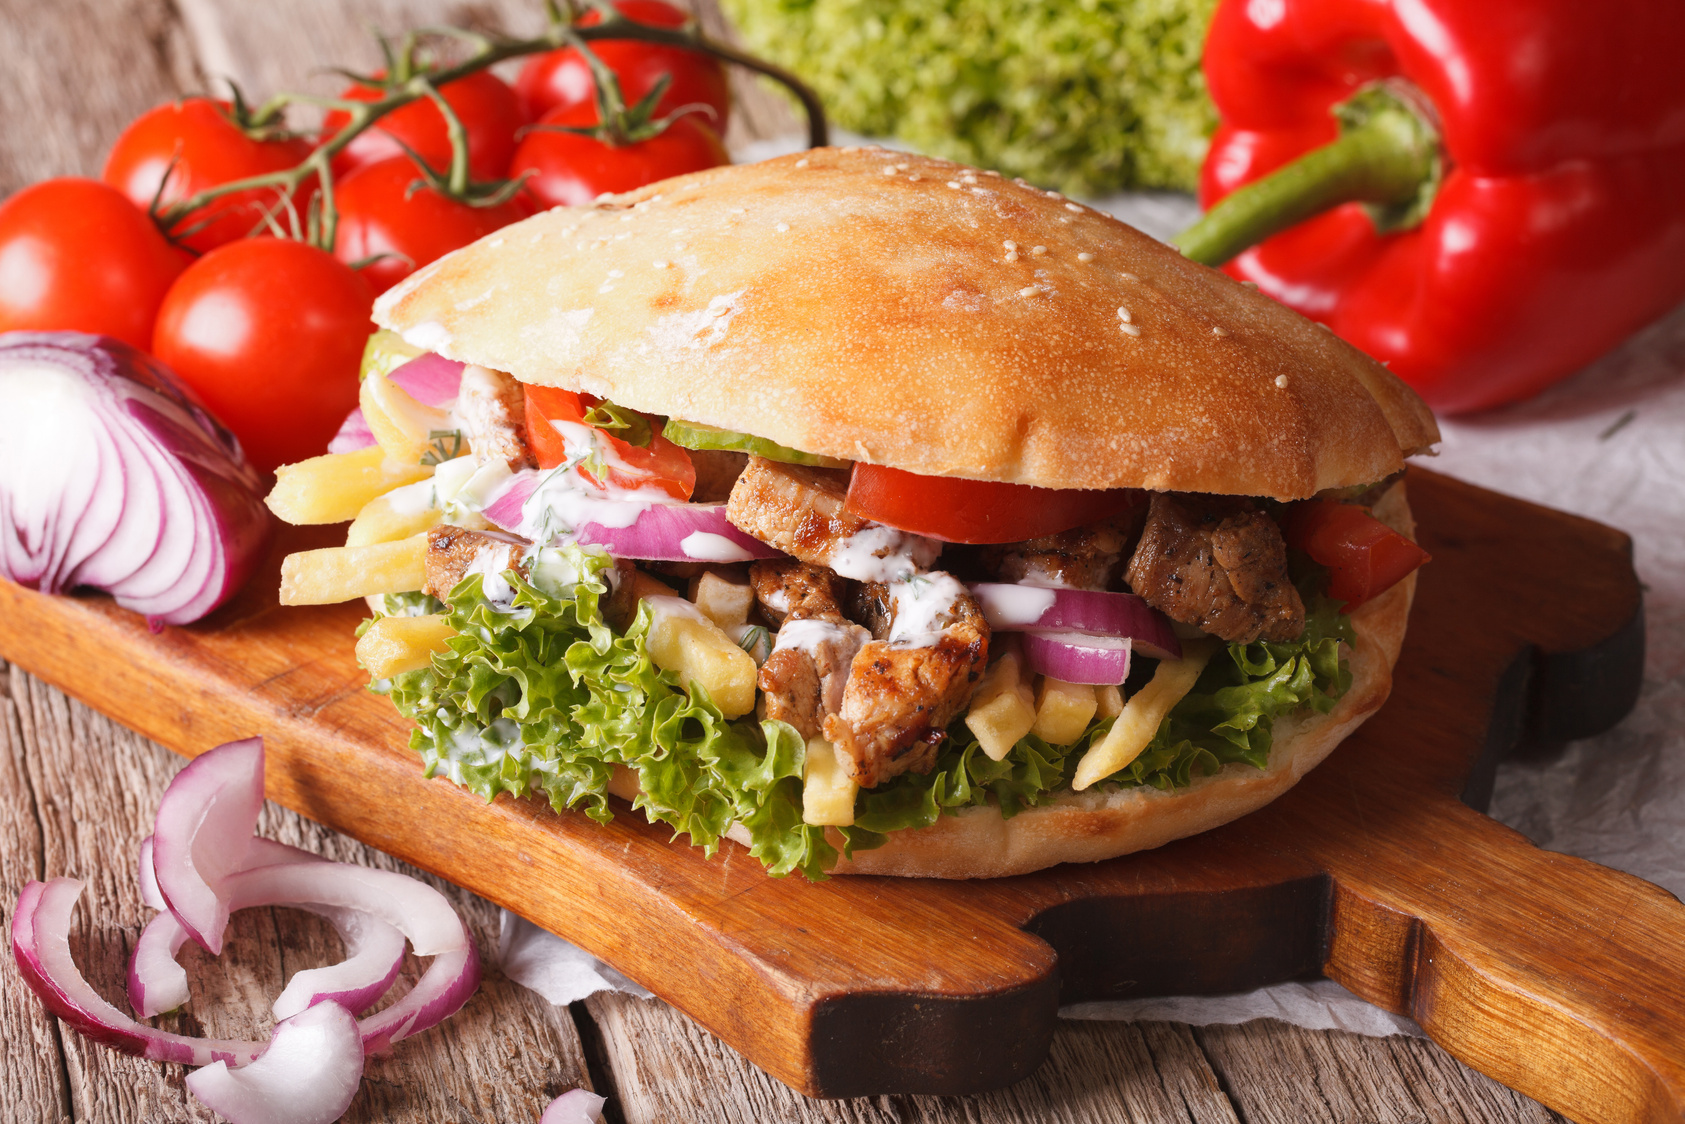 Doner kebab with meat, vegetables and french fries closeup. hori